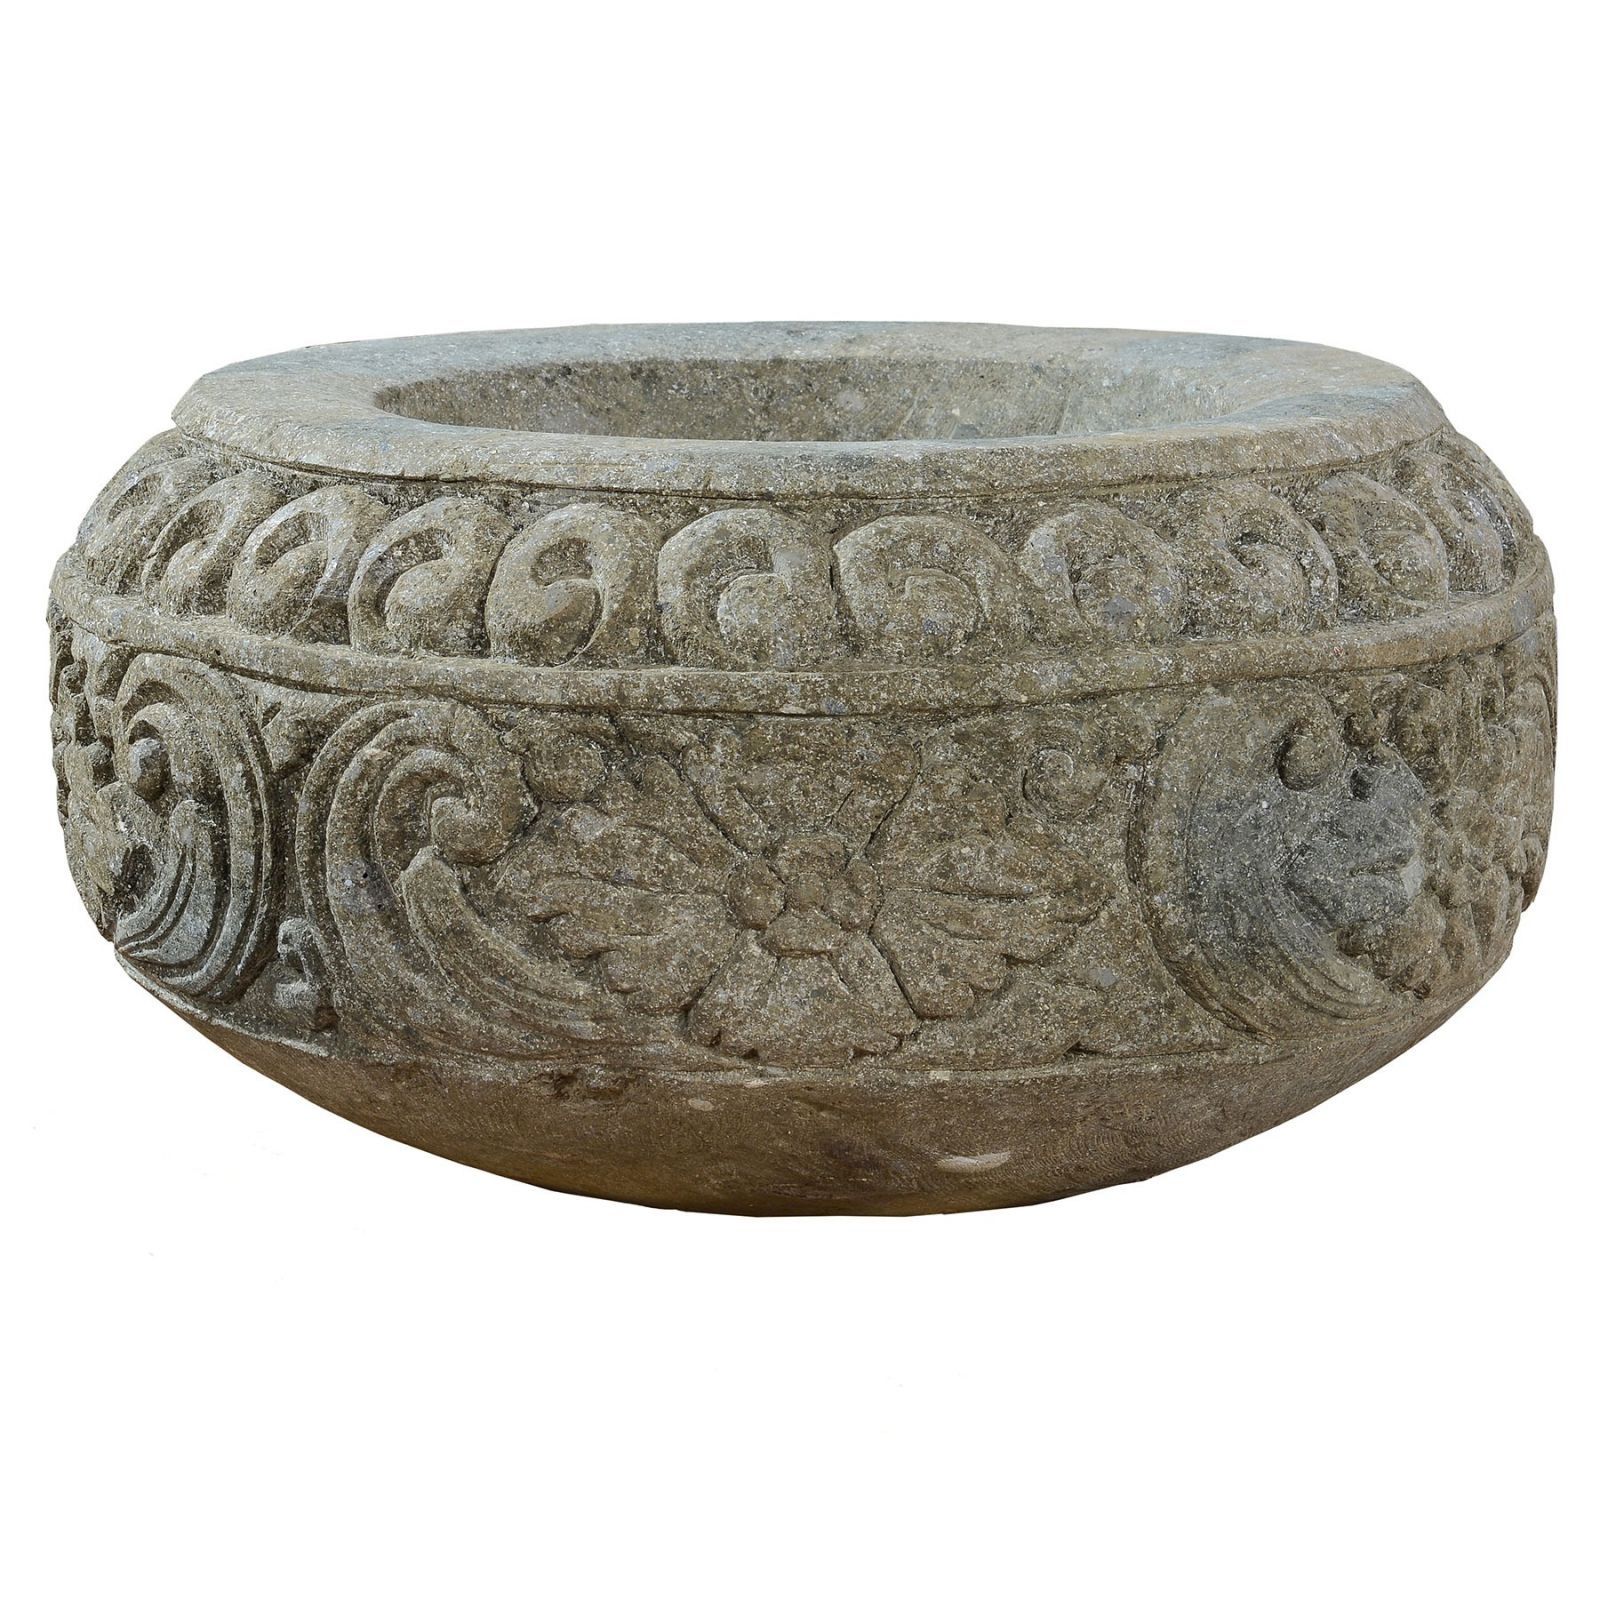 Large Round  or circular stone planter Planters from Pt 